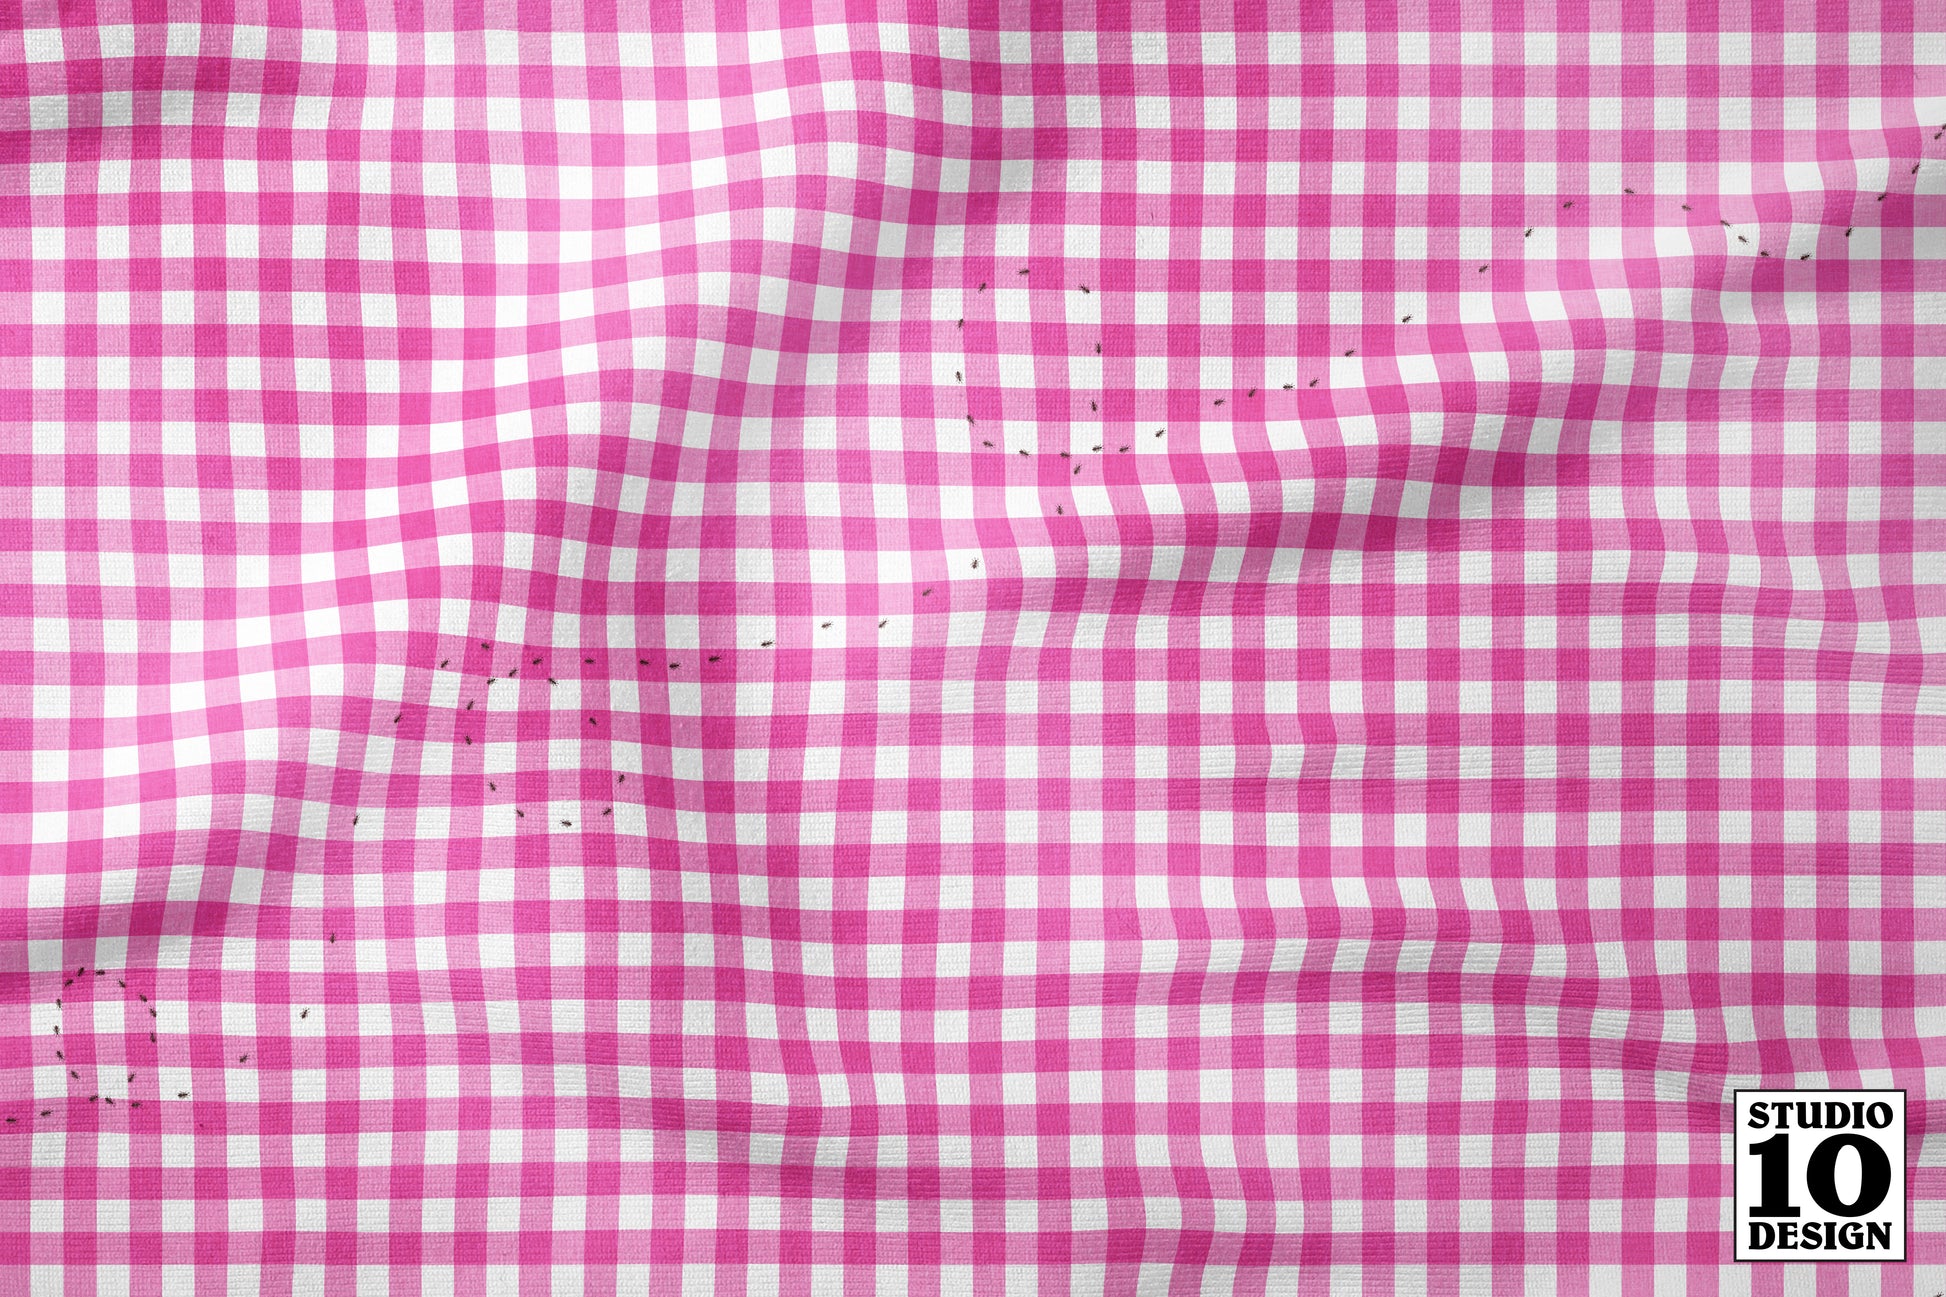 Ants at the Picnic, Pink Gingham Printed Fabric by Studio Ten Design